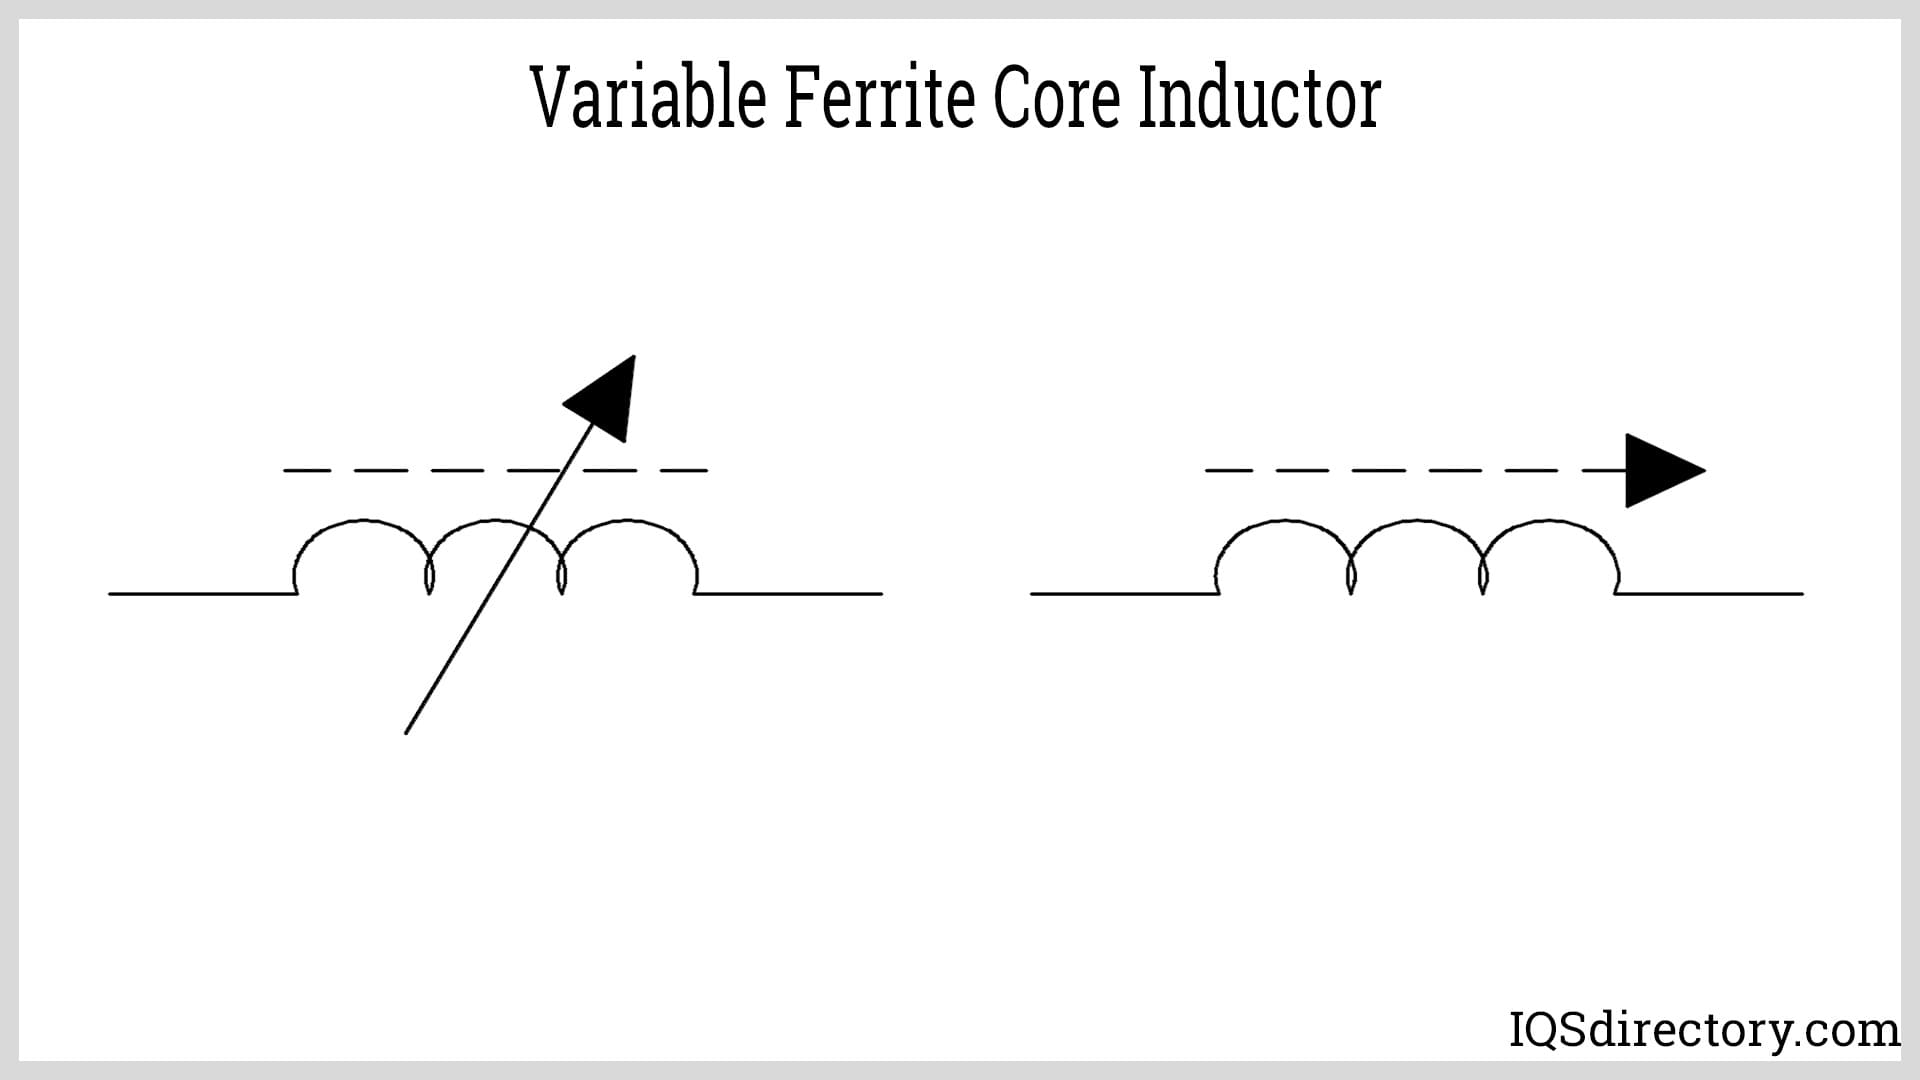 Variable Ferrite Core Inductor